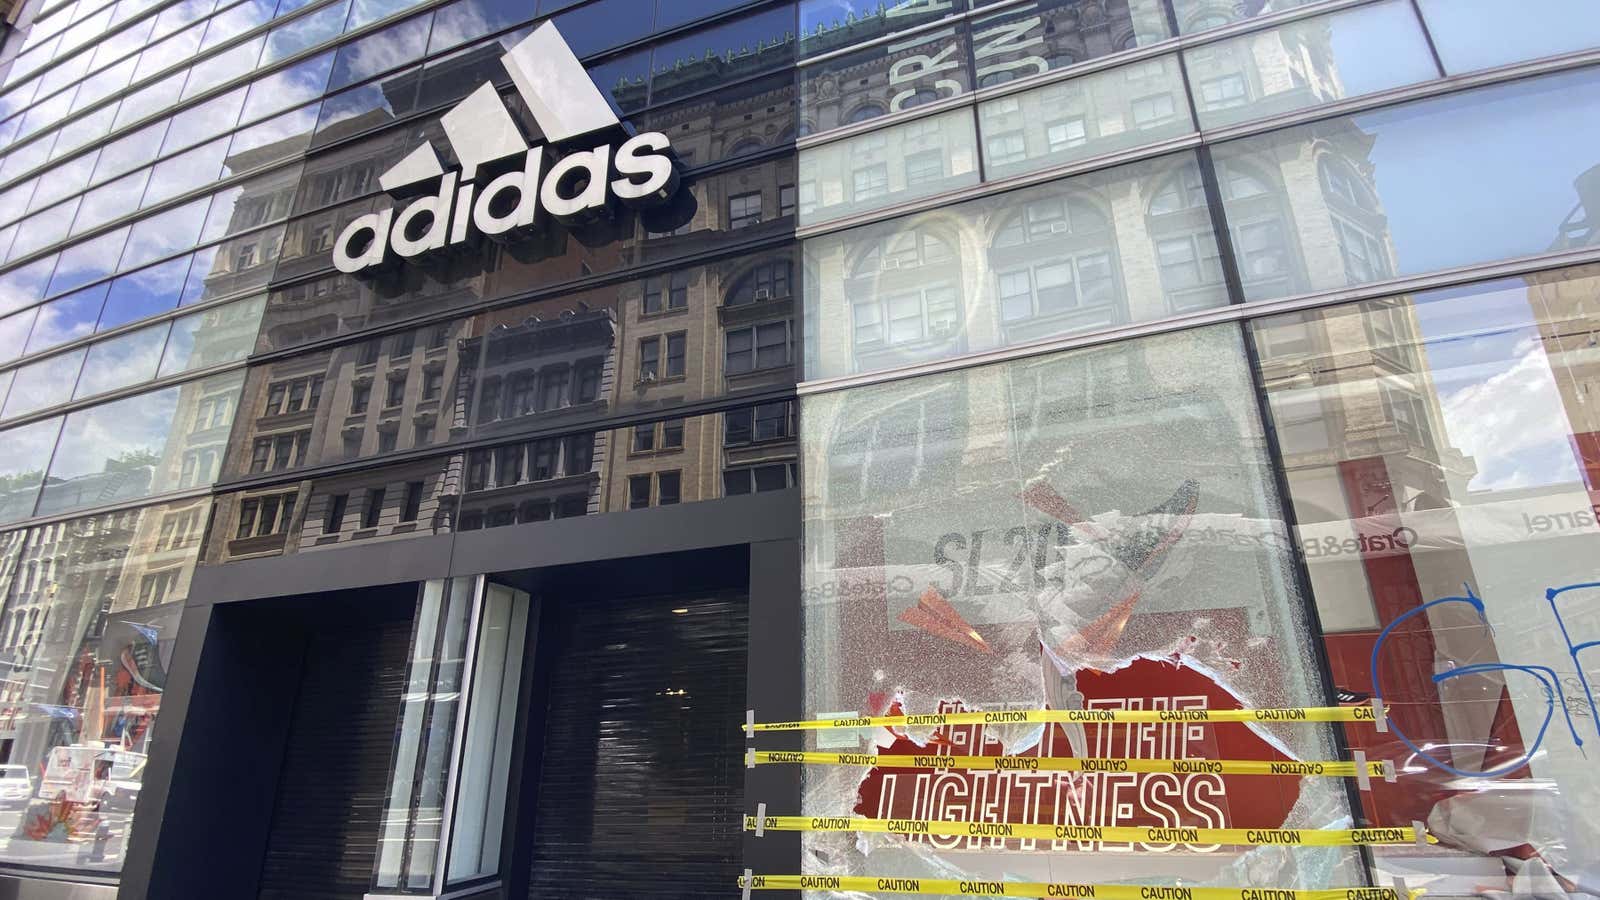 A smashed window at an Adidas store in New York on June 1.